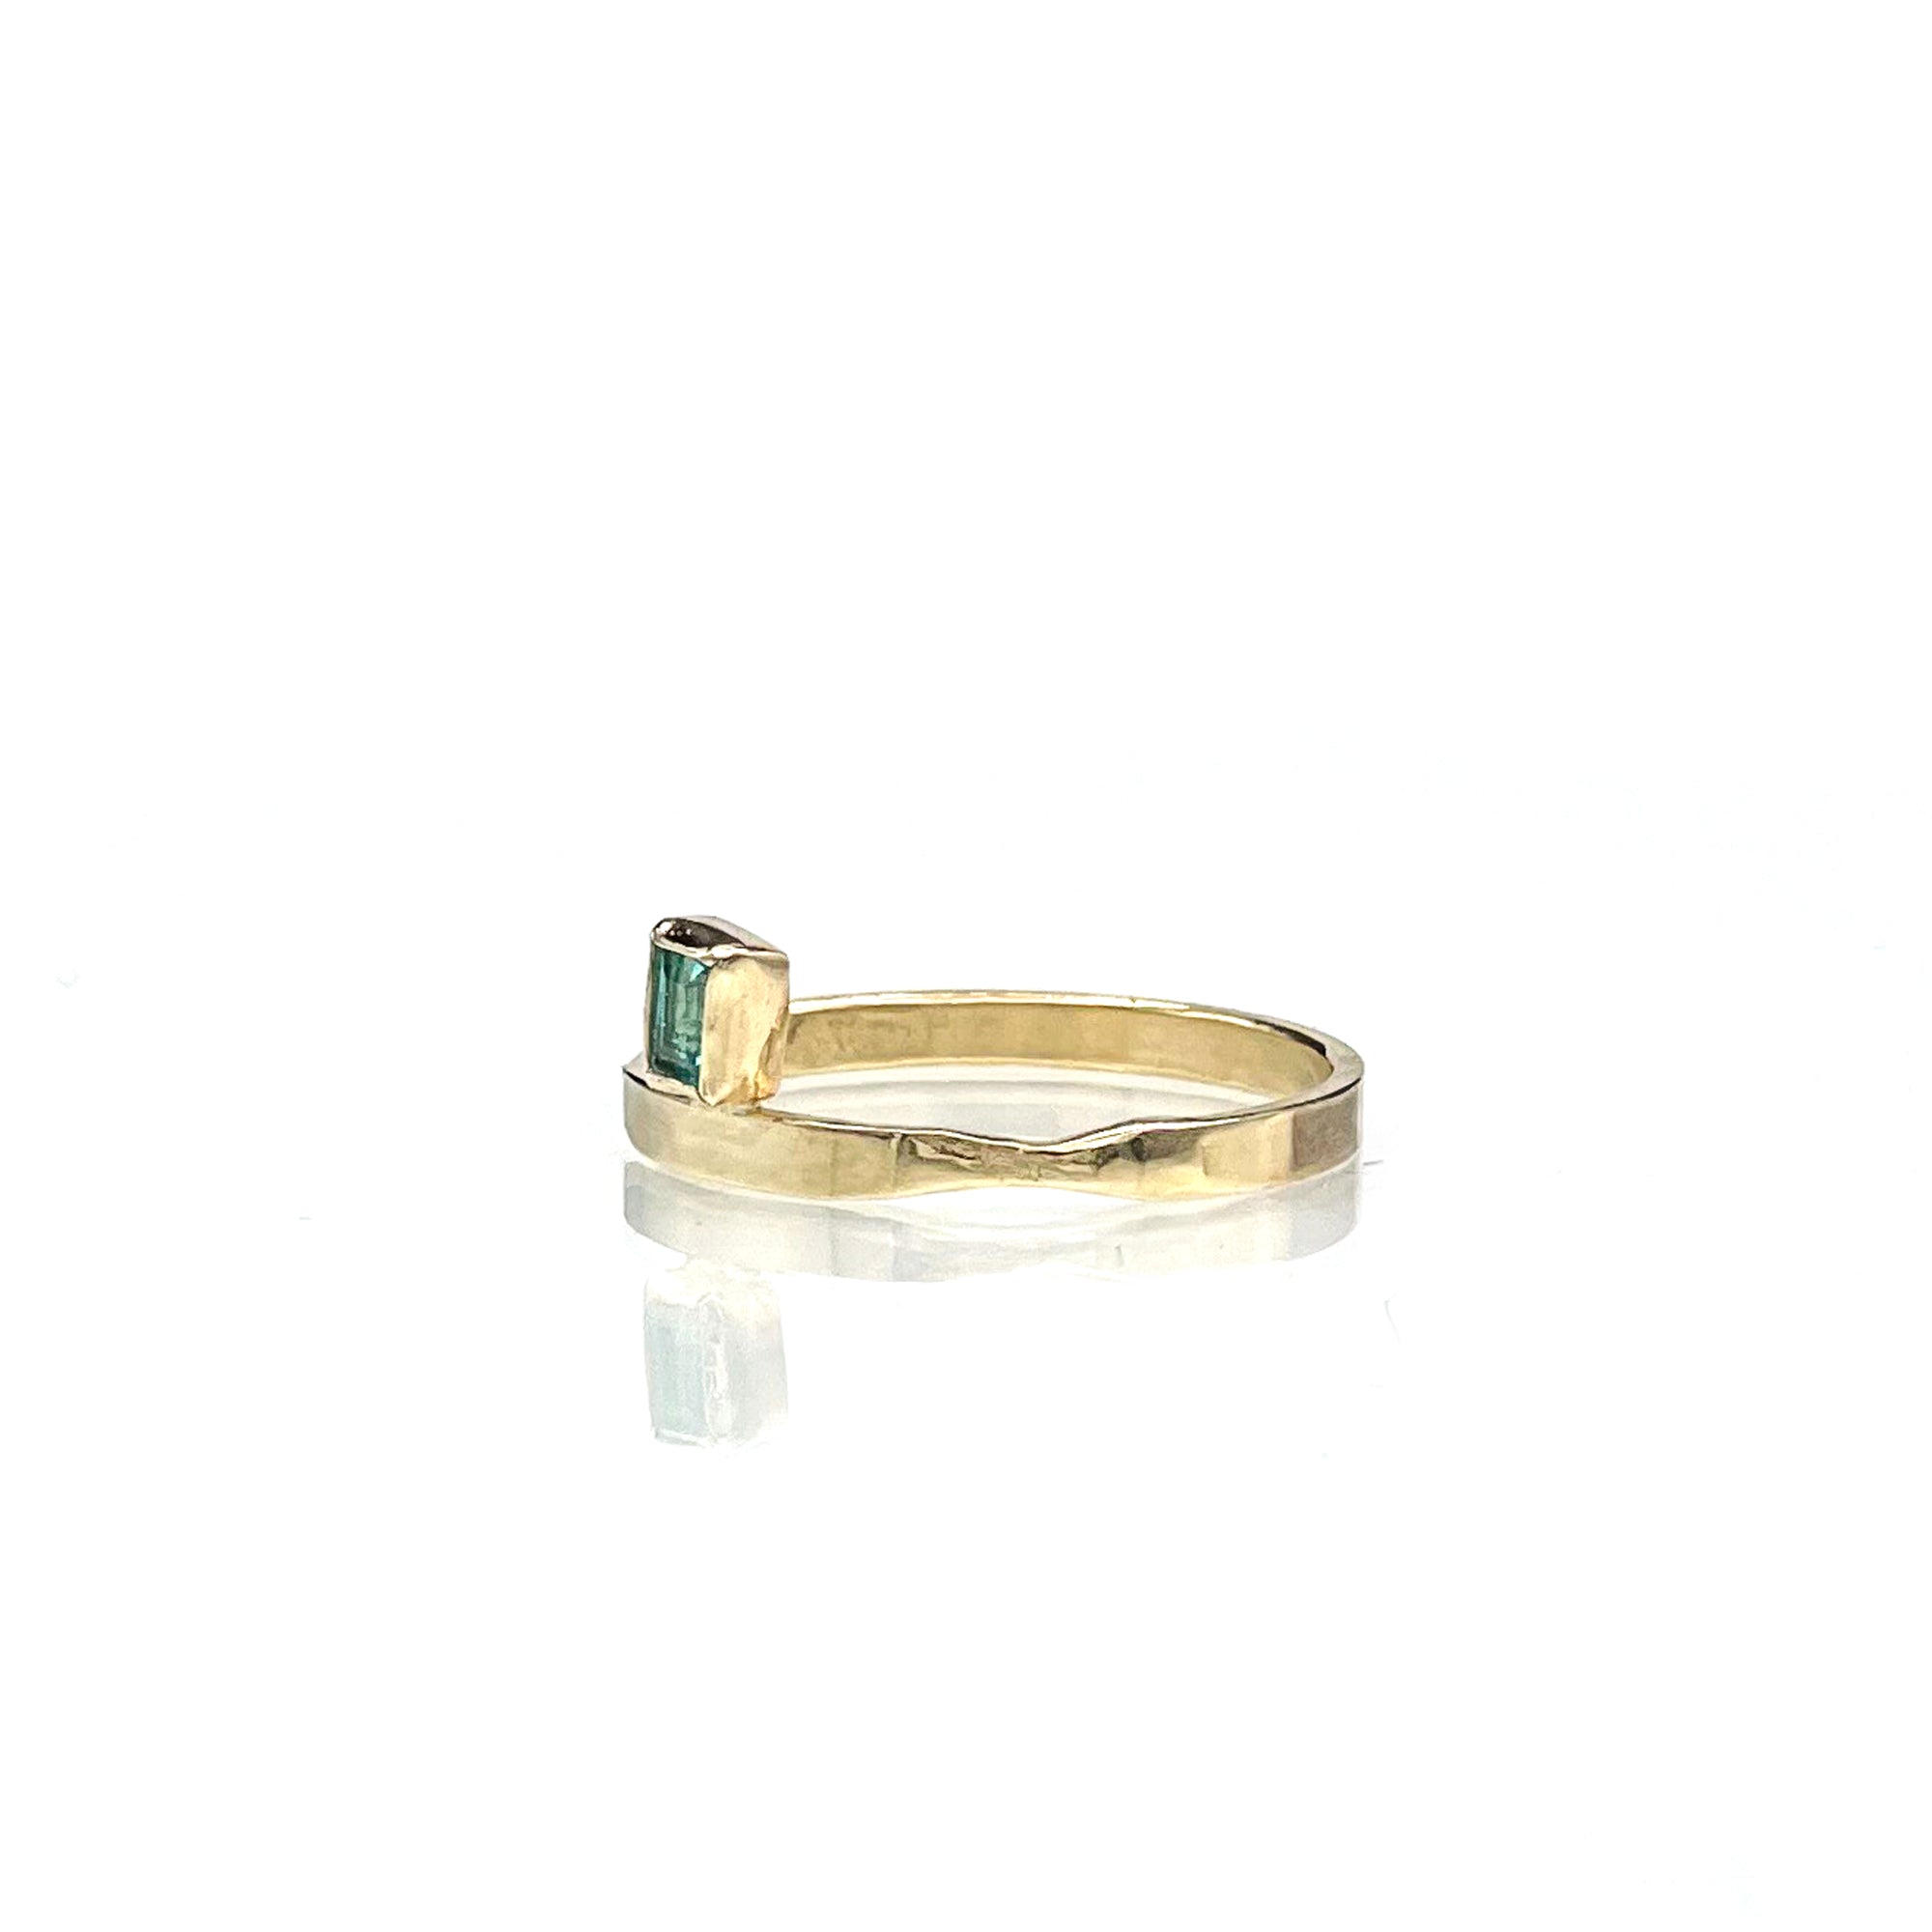 14K Paraiba Tourmaline Ring, Geometric Stacking Ring, SOLID Gold one of a kind